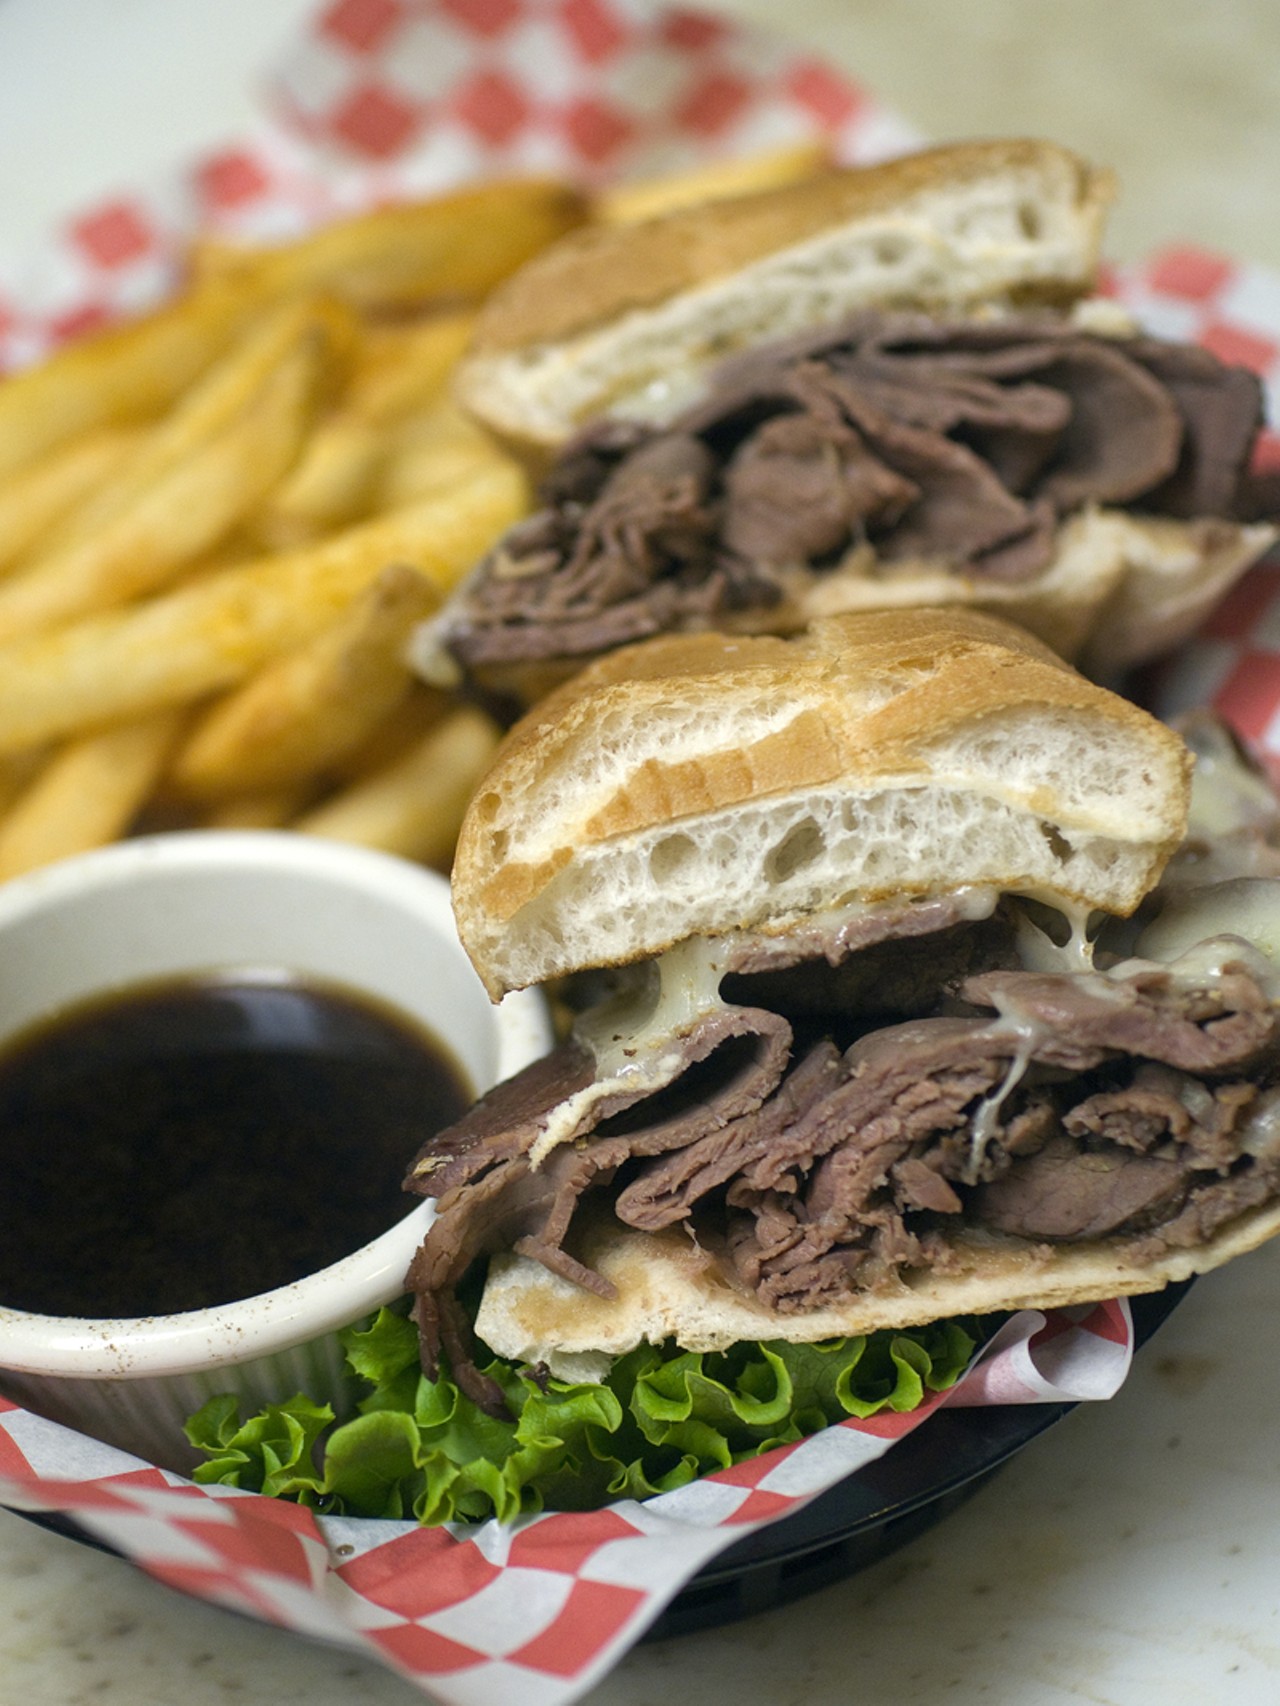 The French Dip is thinly sliced roast beef dipped in au jus and topped with melted Swiss cheese.